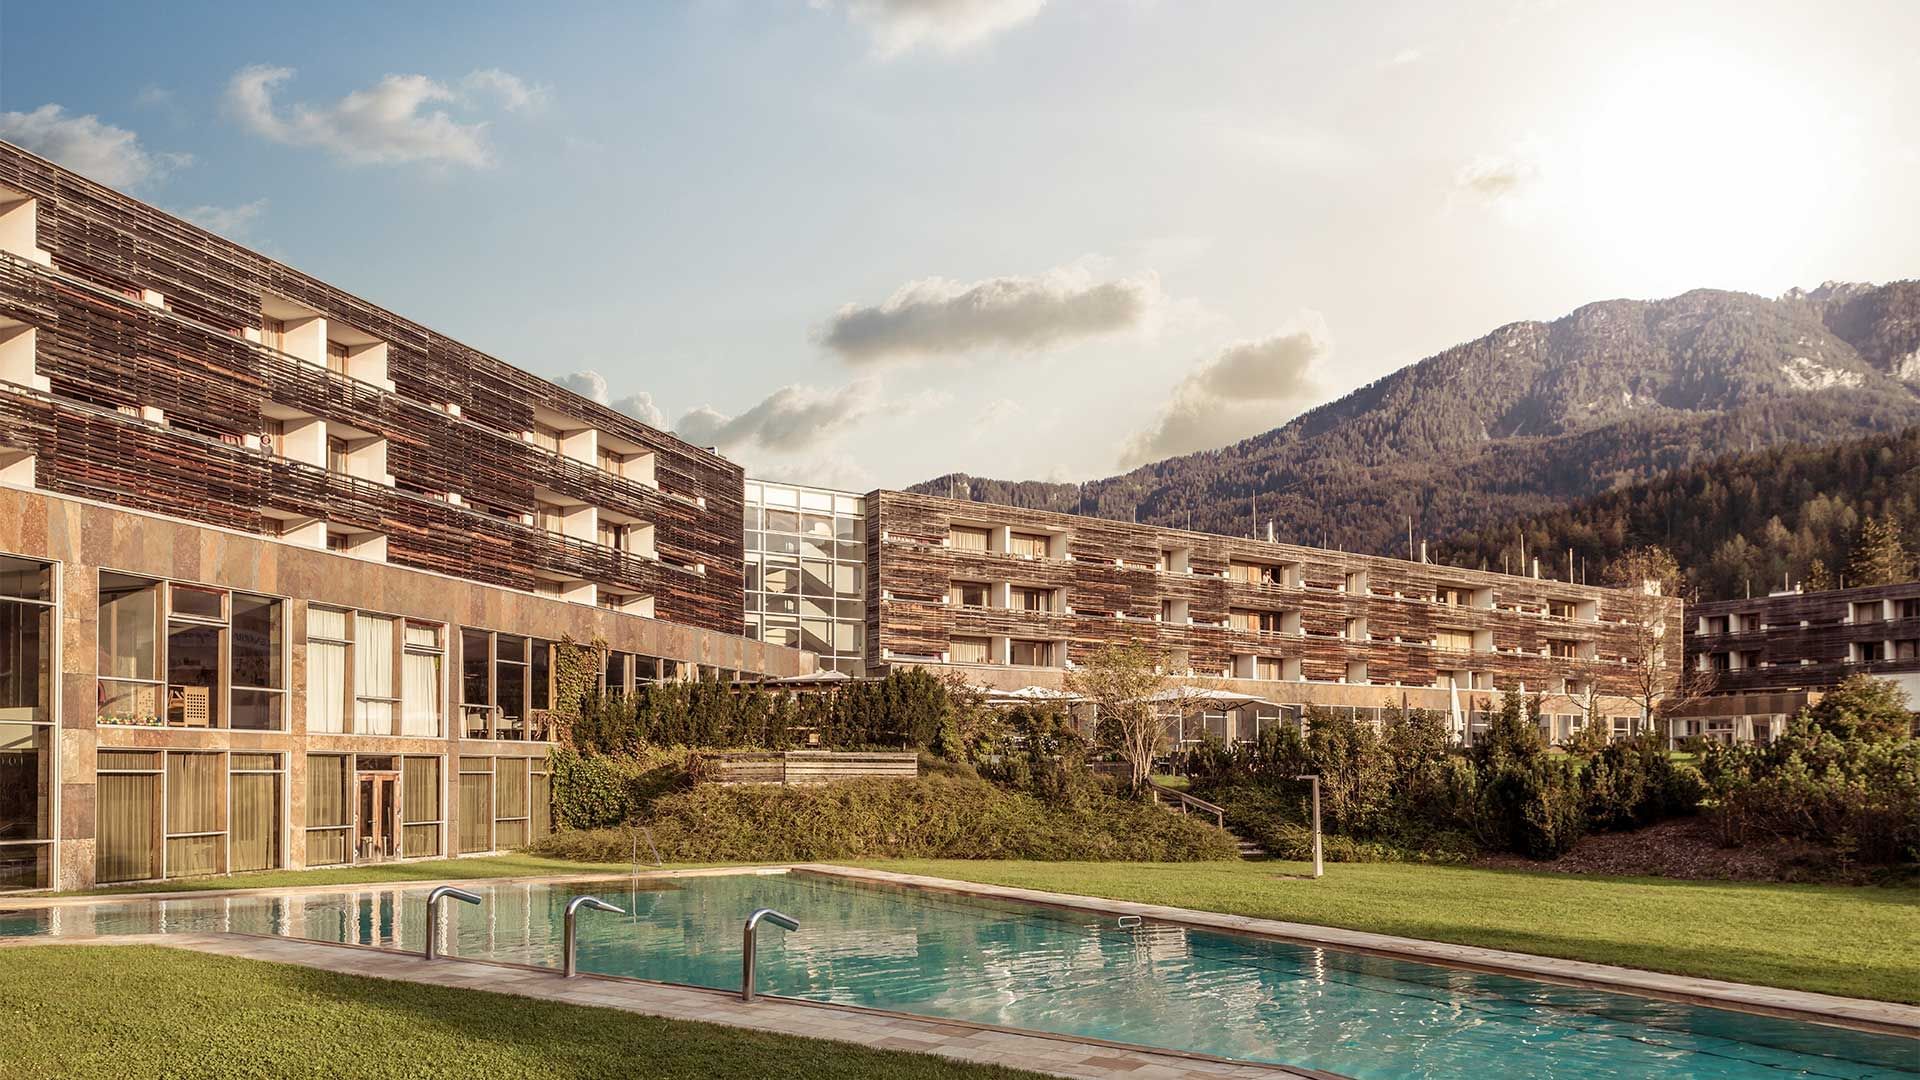 Exterior view of Falkensteiner Hotel Carinzia with the pool